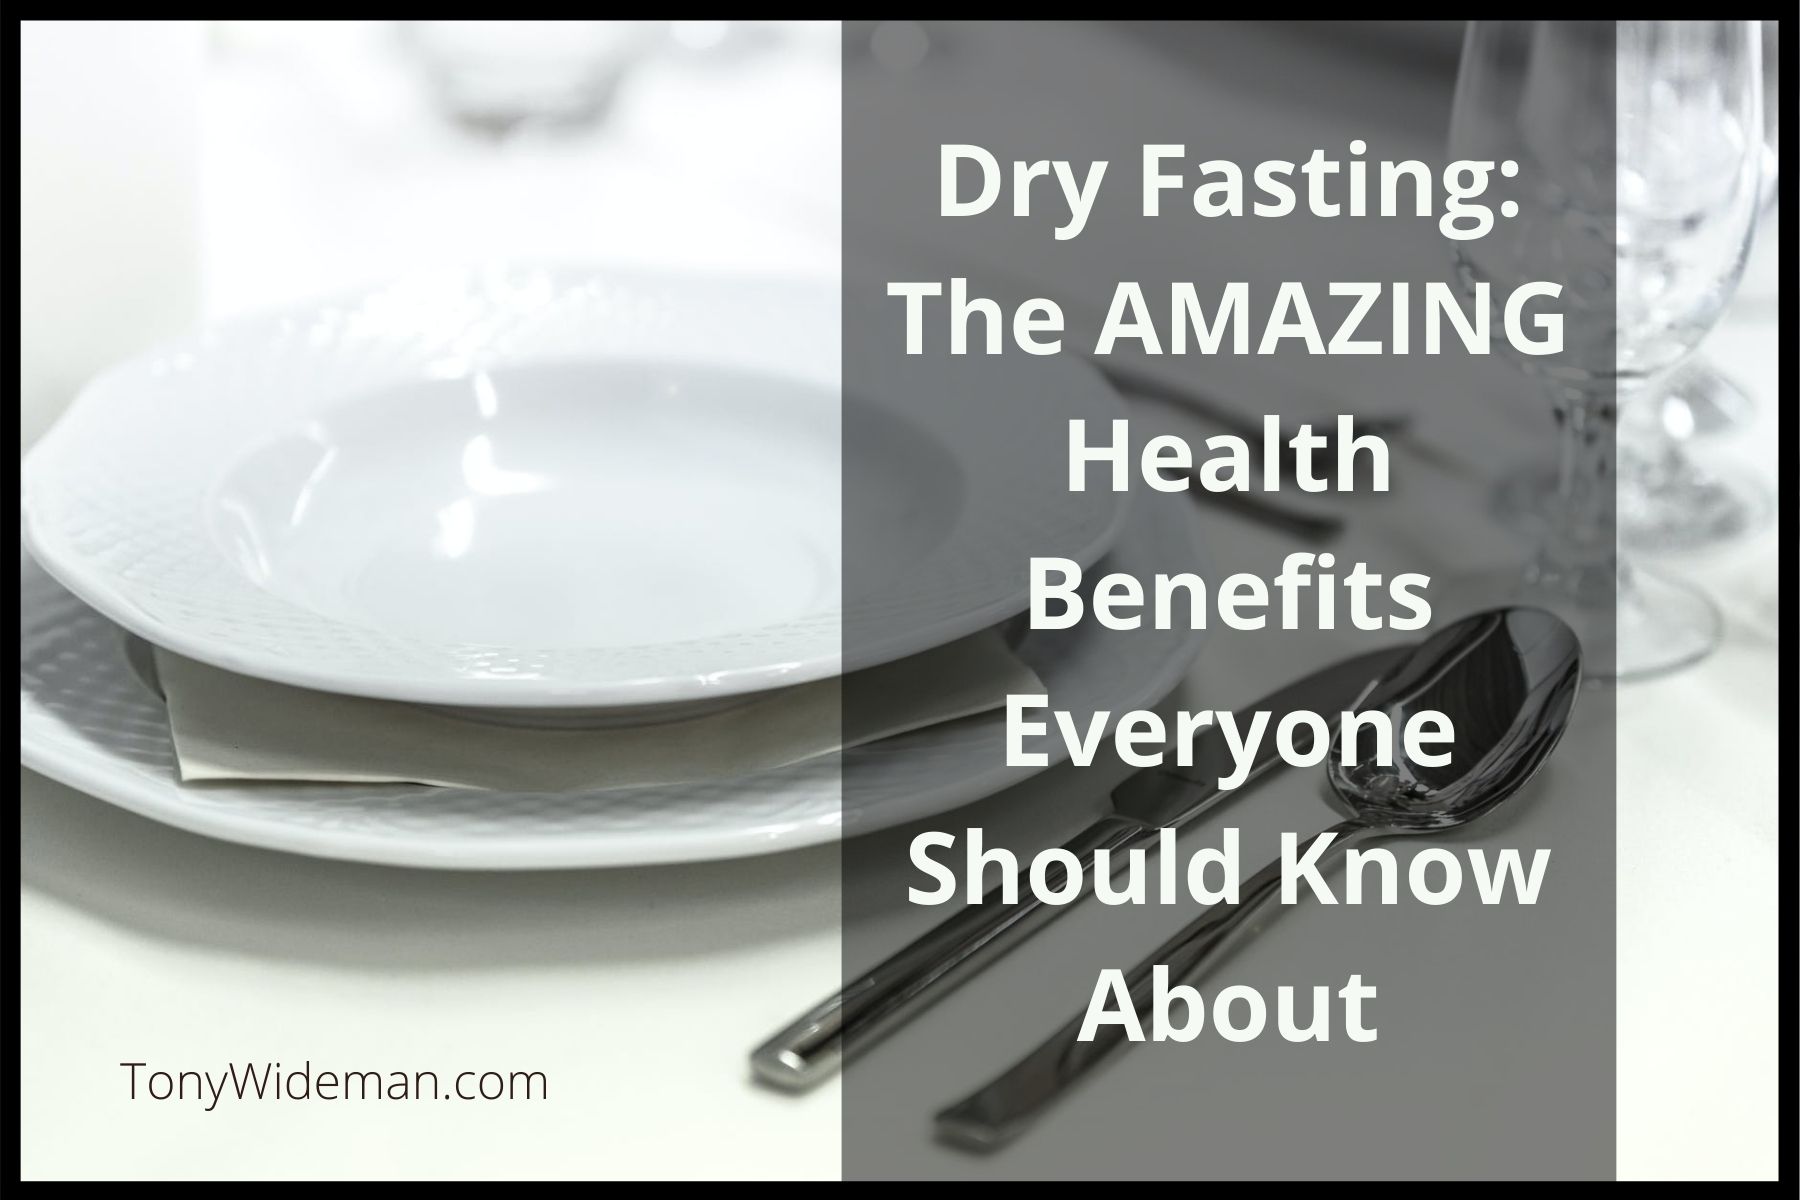 Dry Fasting: AMAZING Health Benefits Everyone Should Know About